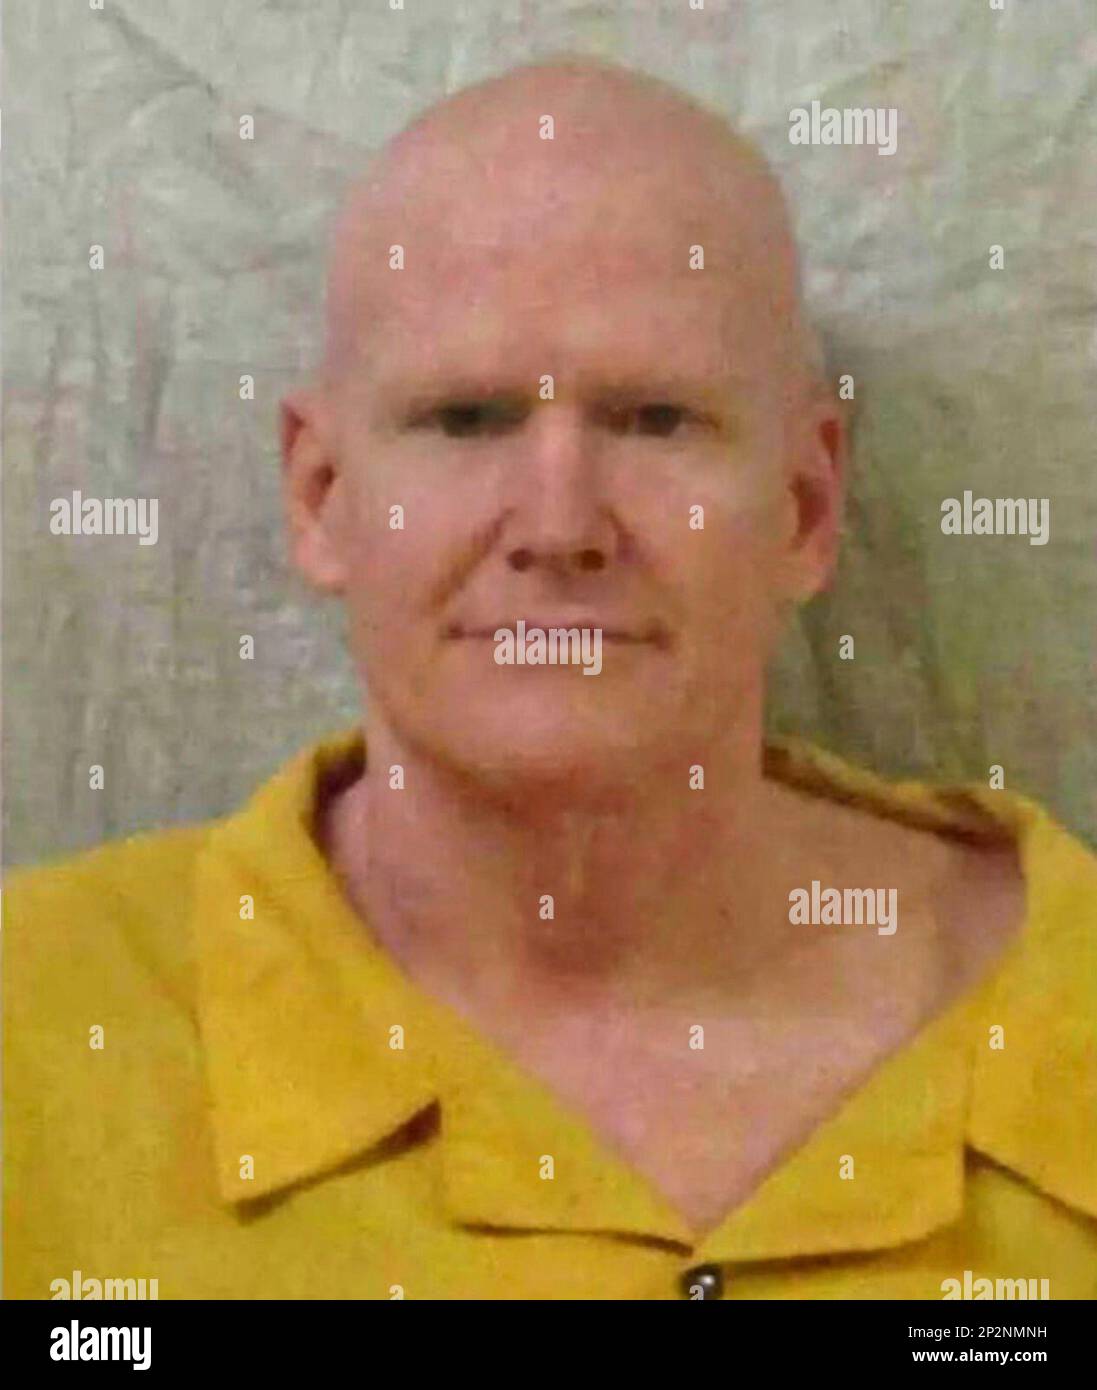 Columbia, United States. 04th Mar, 2023. South Carolina Department of Corrections mugshot of former lawyer Alex Murdaugh, in a yellow prison issued jumpsuit and with his head shaved at Kirkland Correctional Center, March 3, 2023 in Columbia, South Carolina. Murdaugh was convicted of the double murder of his wife and son and sentenced to life two life sentences without parole. Credit: SCDC/South Carolina Department of Corrections/Alamy Live News Stock Photo